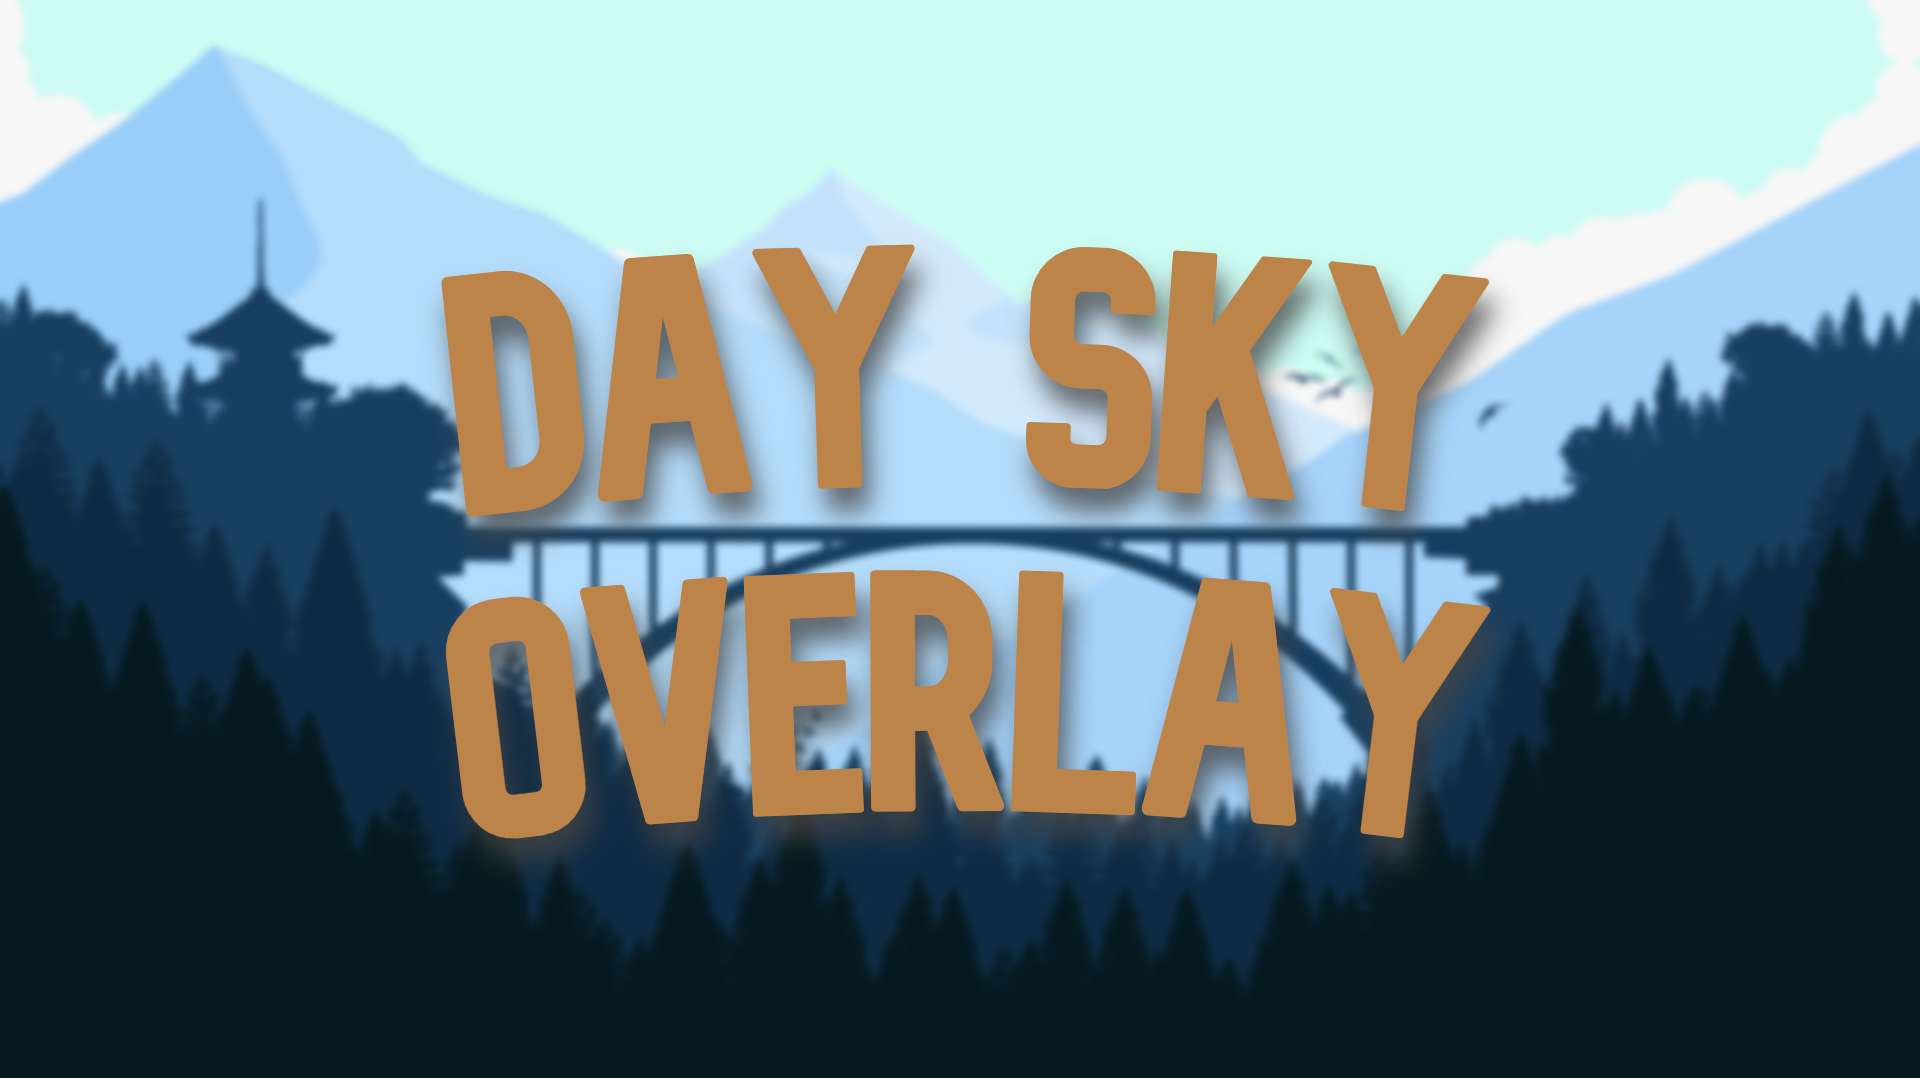 Day Sky Overlay #1 16x by rh56 on PvPRP